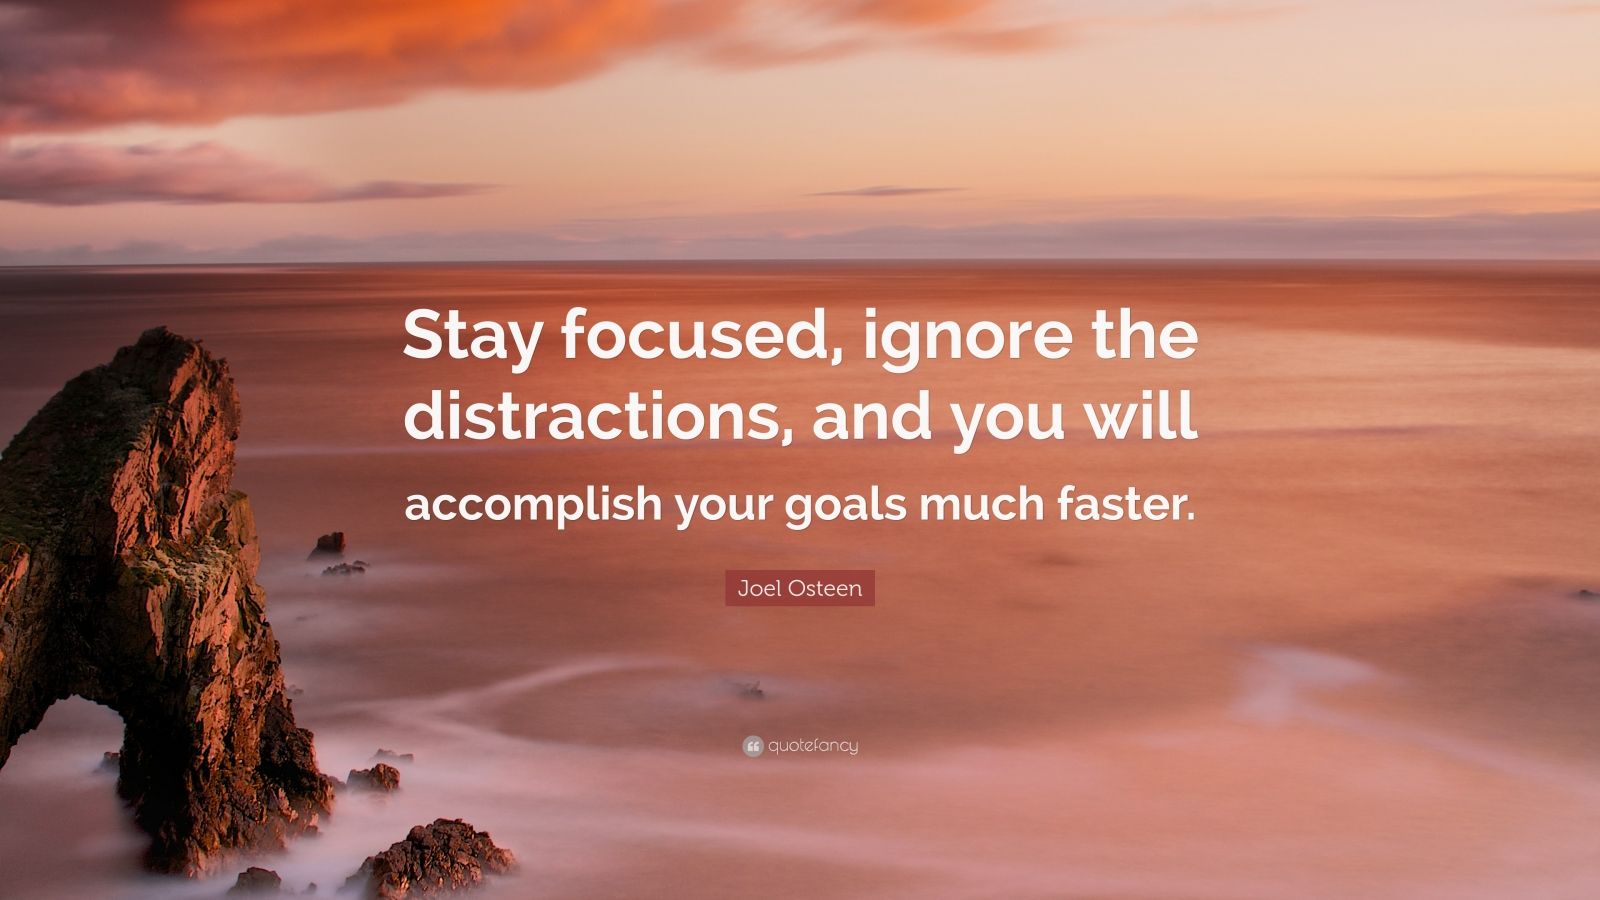 the goal will be focused